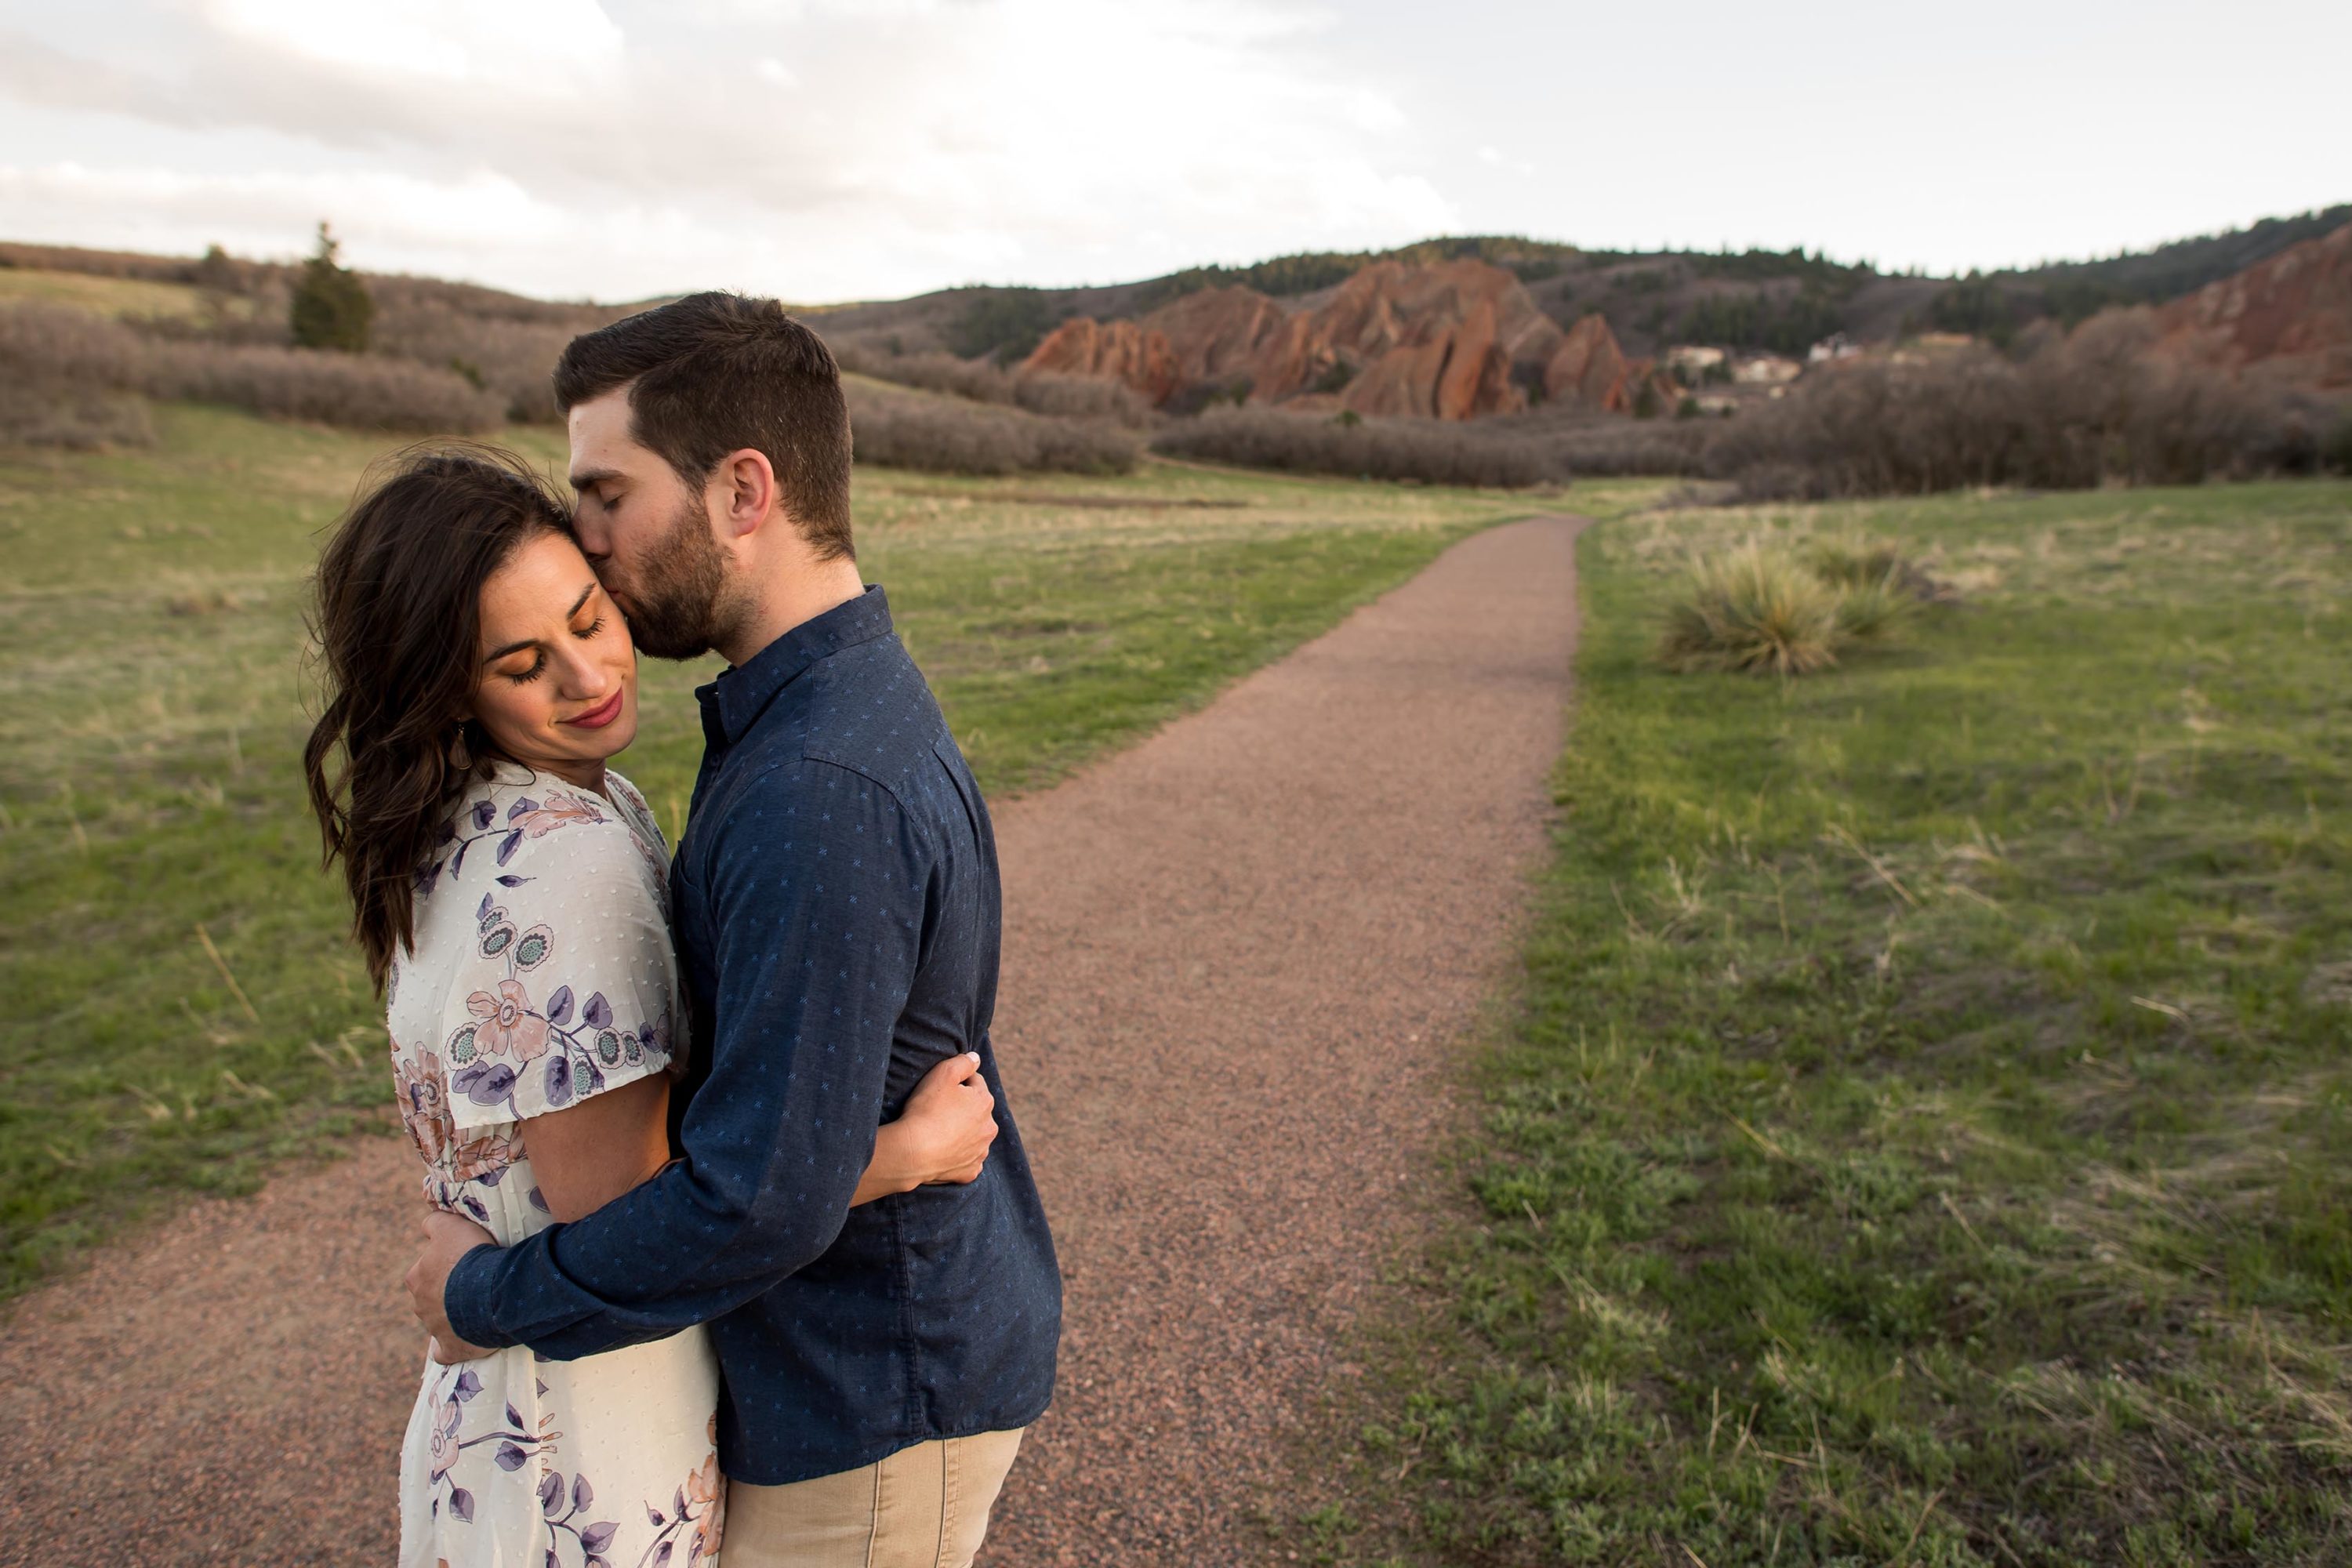 Roxborough State Park Engagement photos with Mary and Charlie in Littleton, Colorado, on May 7, 2021.